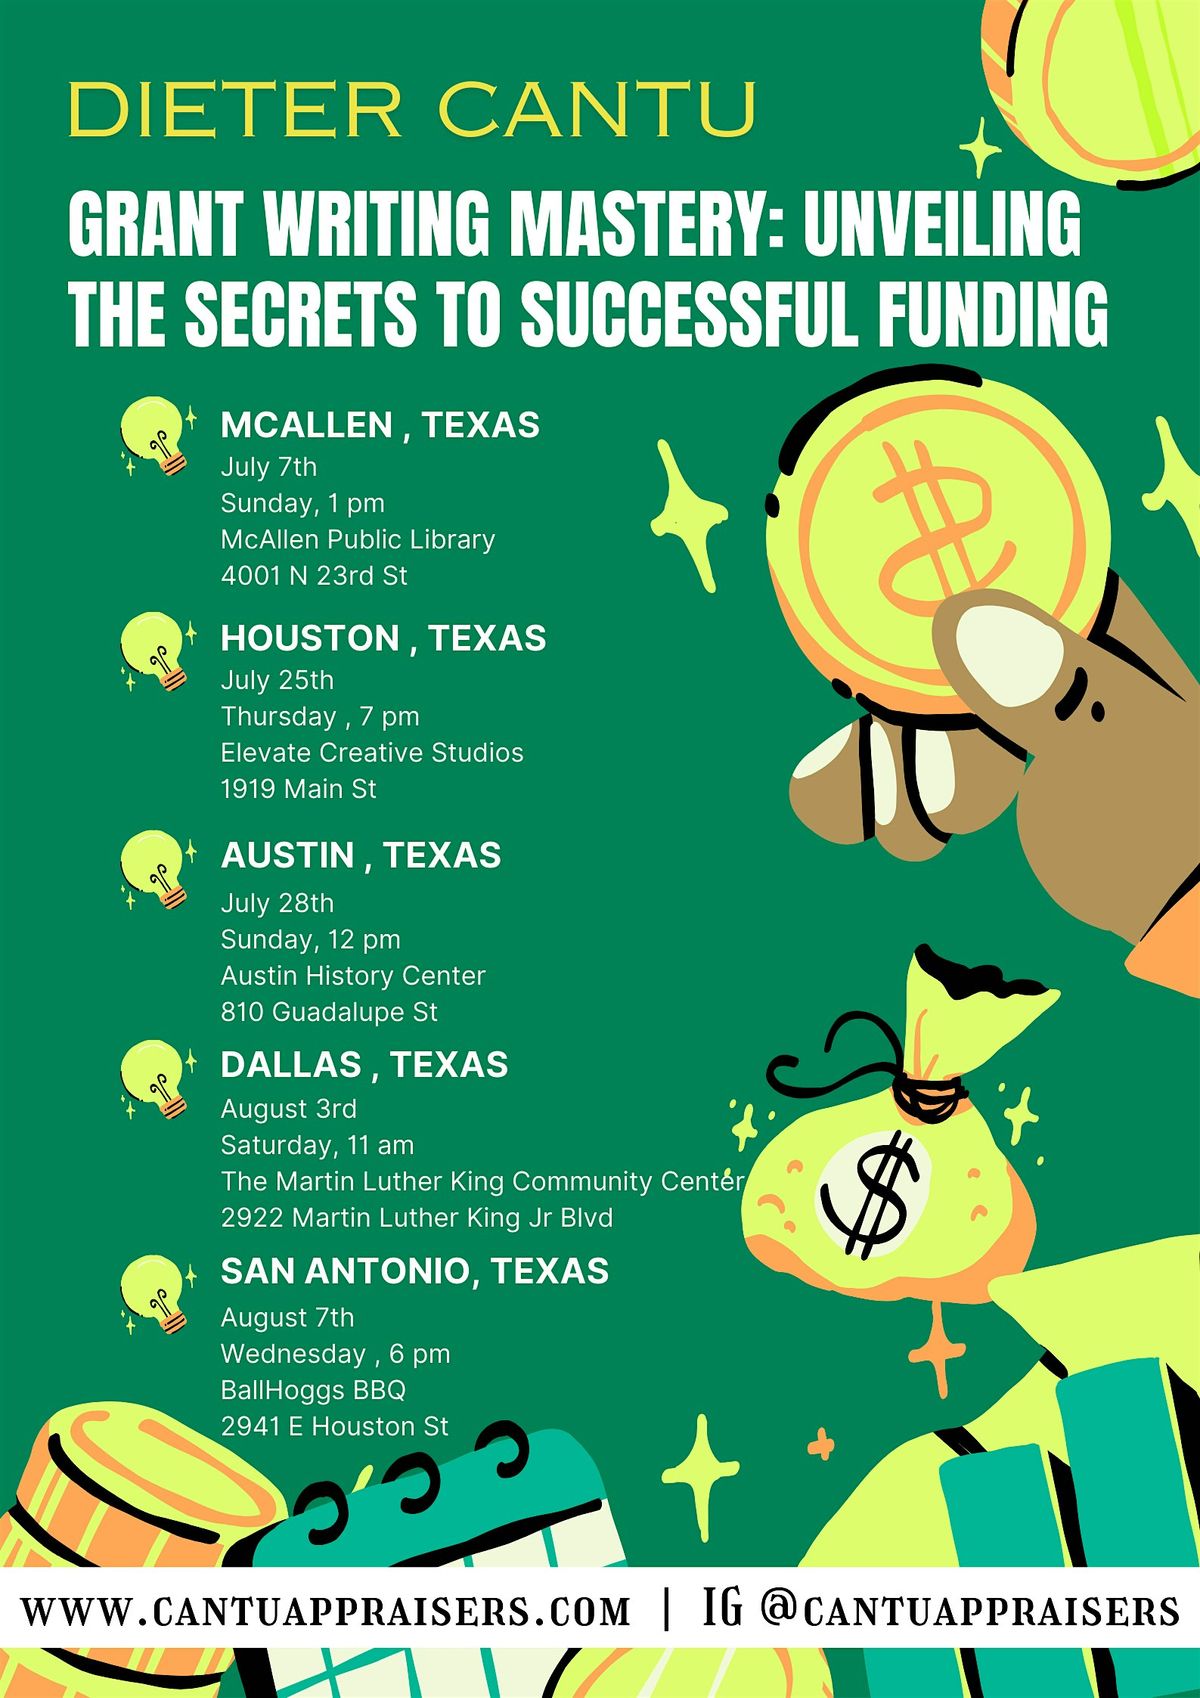 GRANT WRITING MASTERY: UNVEILING THE SECRETS TO SUCCESSFUL FUNDING (AUSTIN)